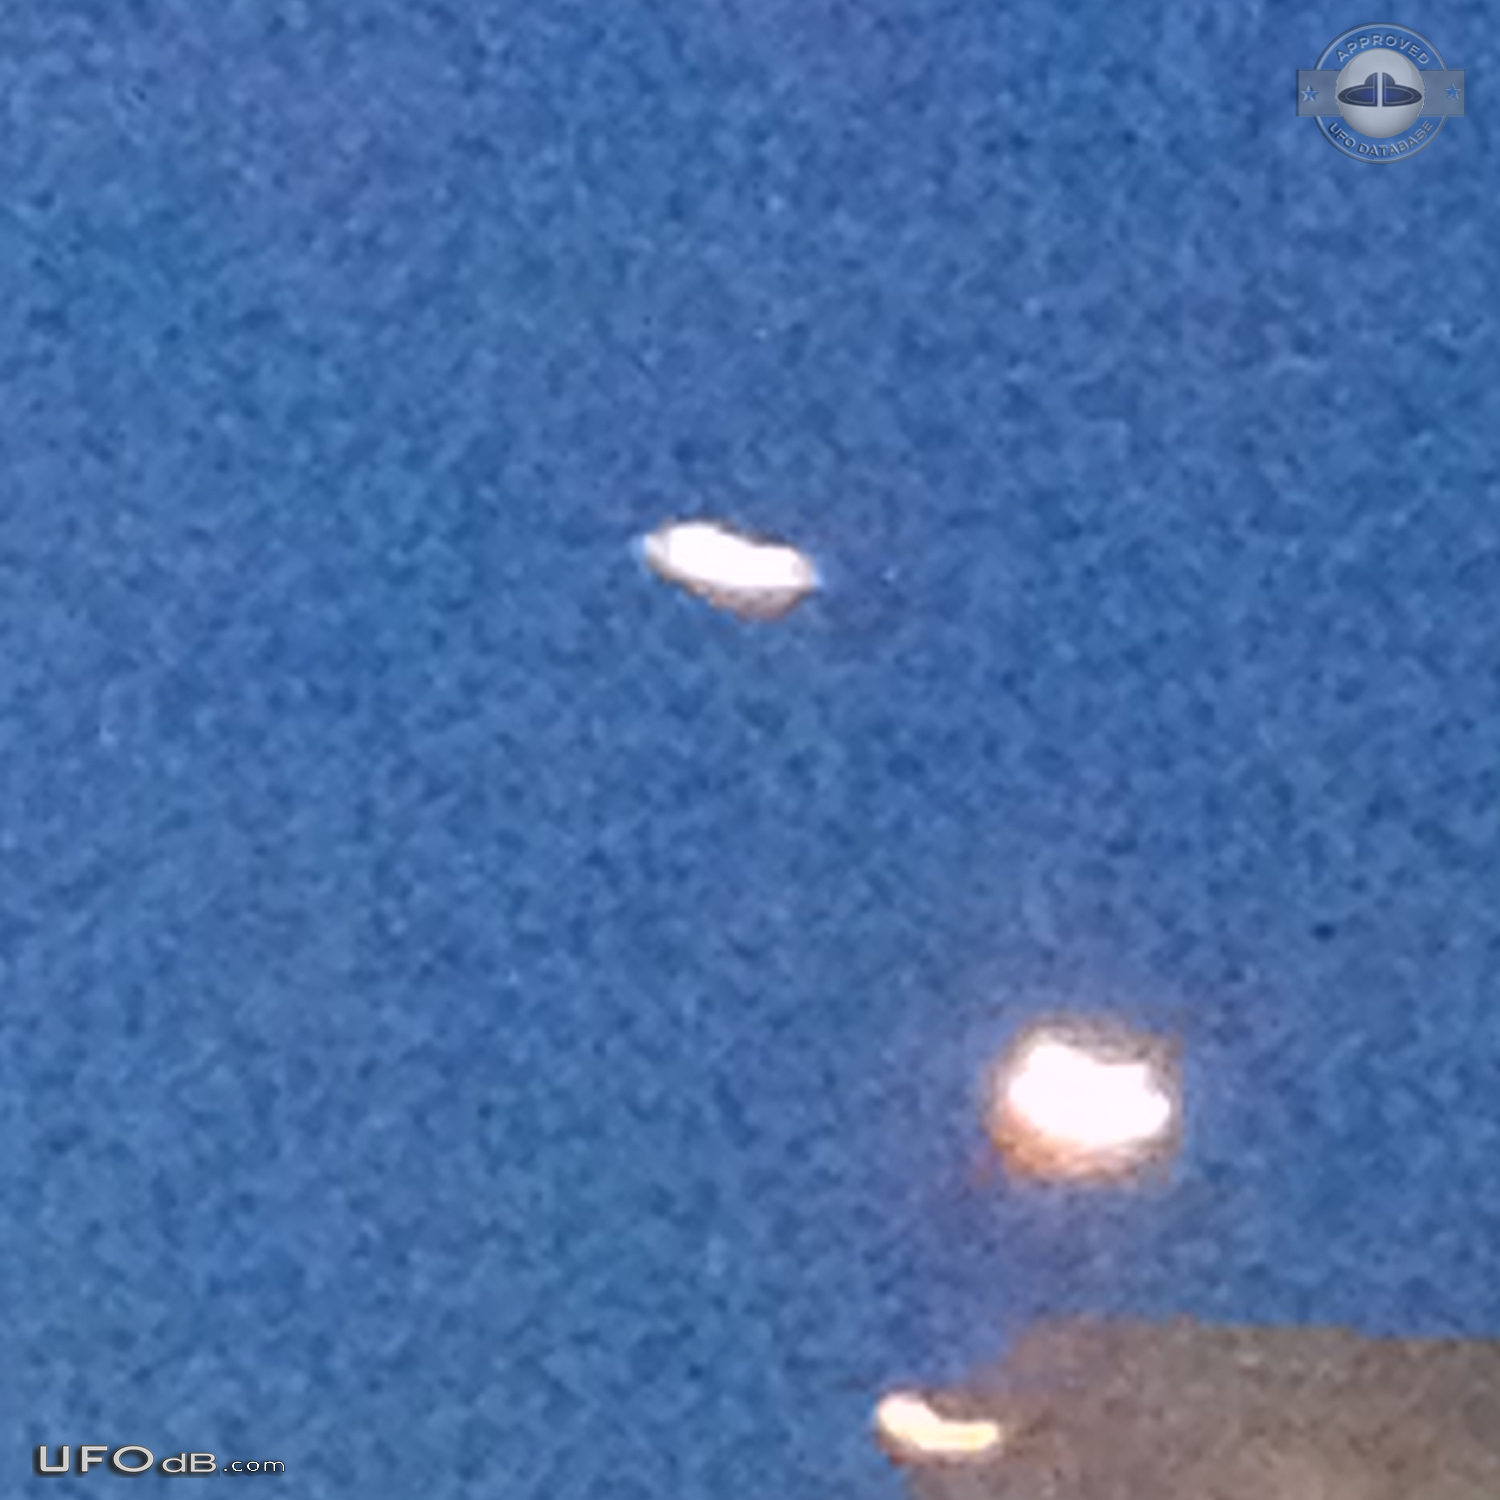 Luminescent dome shaped UFO with red light at its base Los Angeles USA UFO Picture #730-5